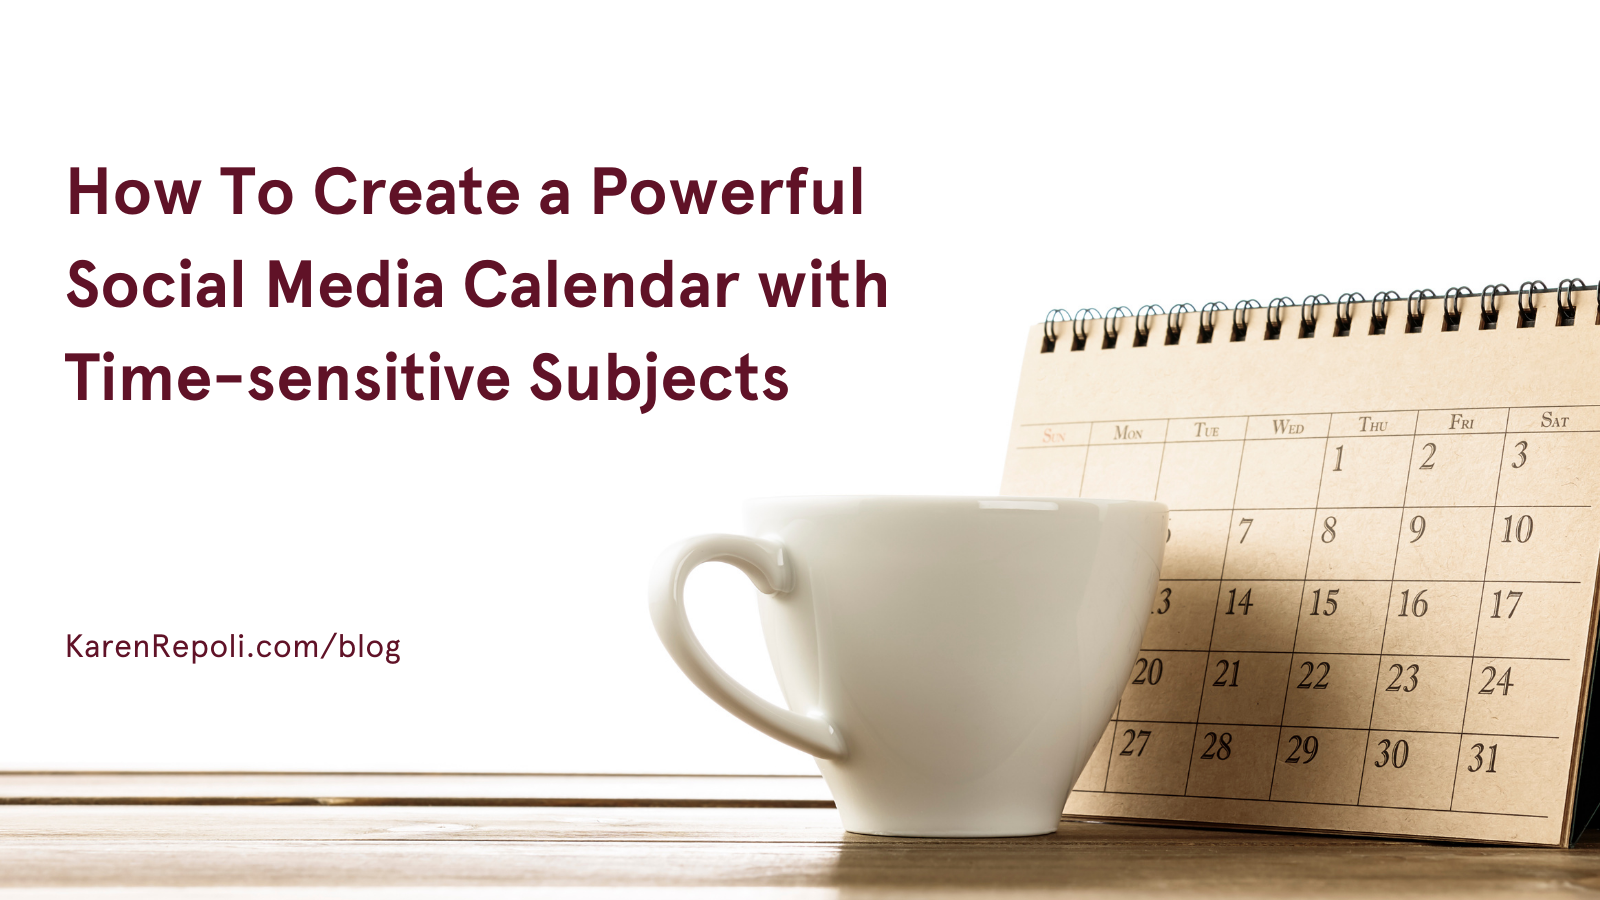 How To Create a Powerful Social Media Calendar with Time-sensitive Subjects